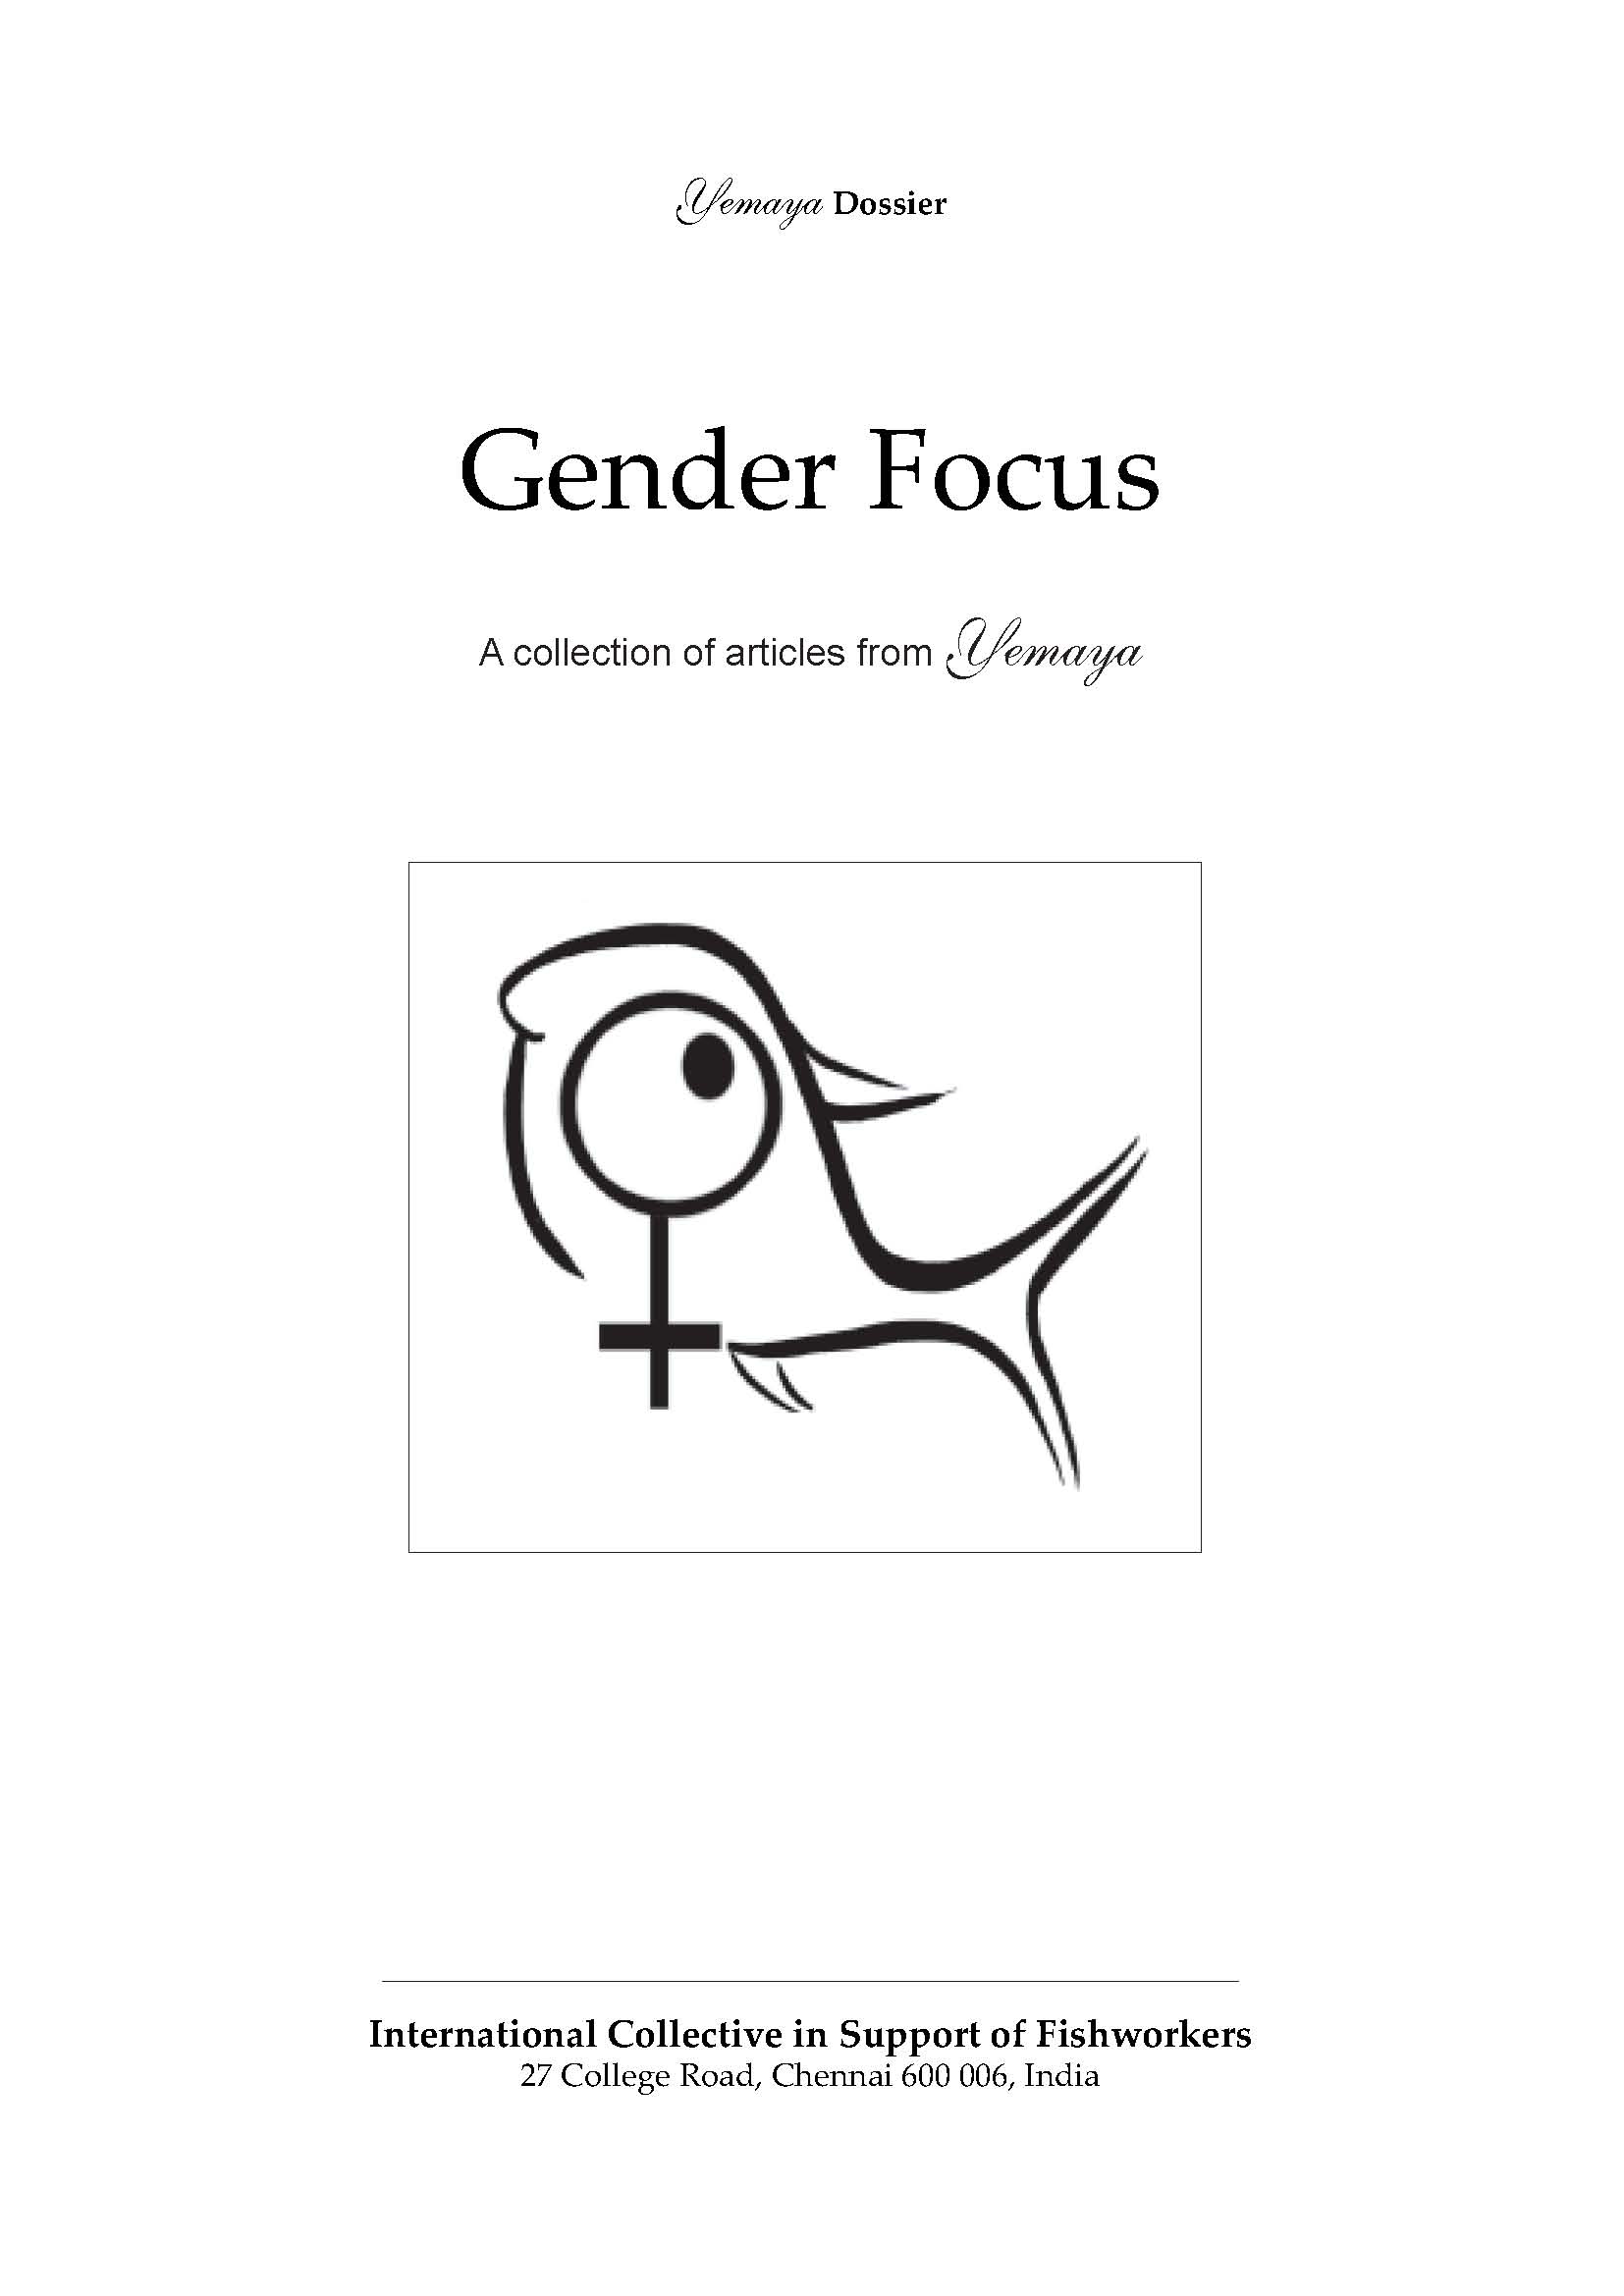 Gender Focus: A collection of articles from Yemaya